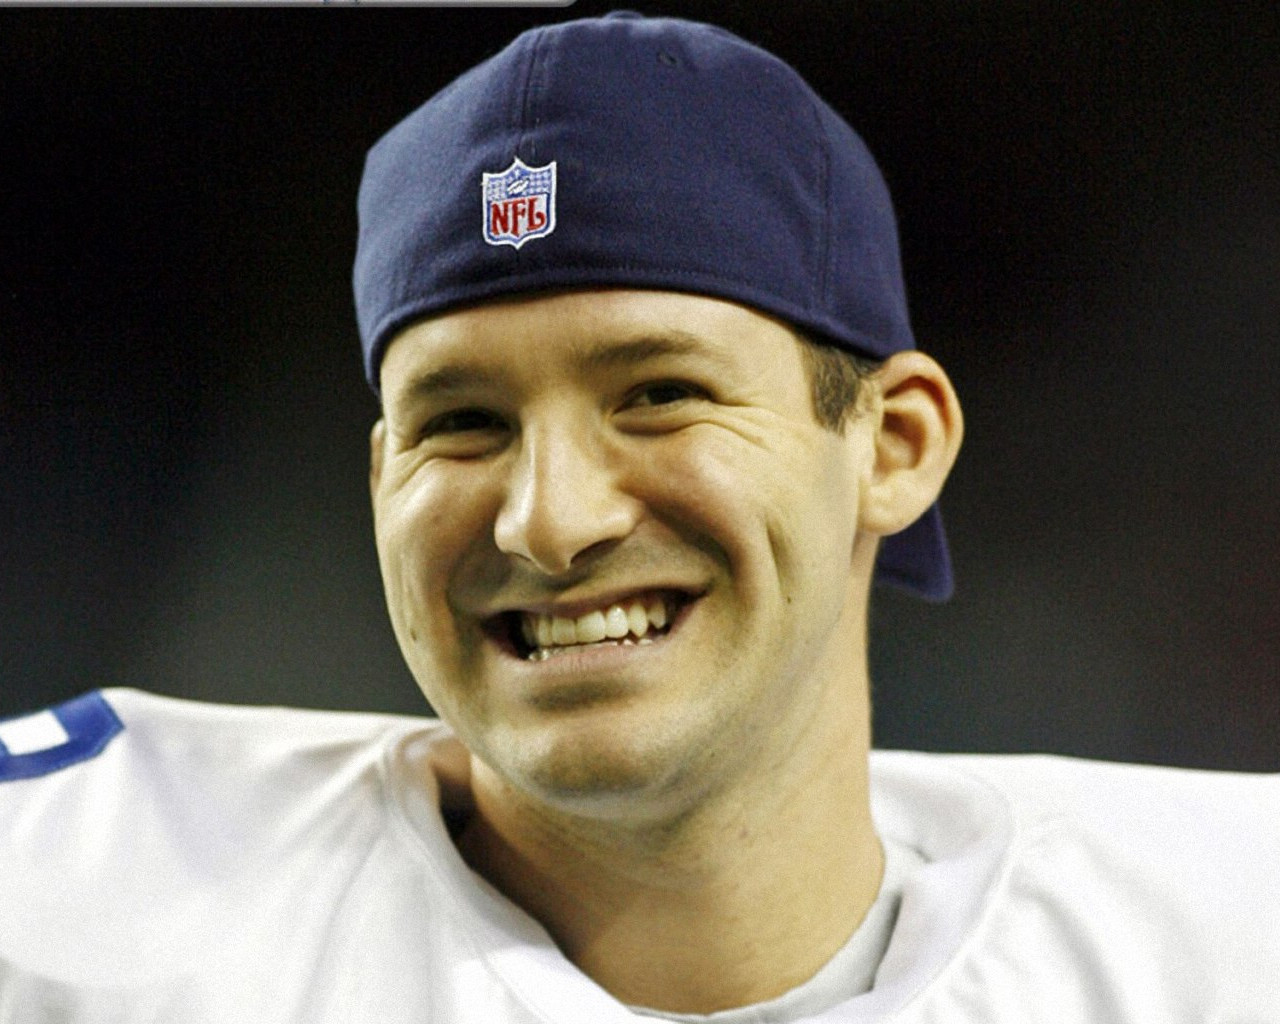 Tony Romo 1280x1024 Wallpapers 1280x1024 Wallpapers Pictures 1280x1024